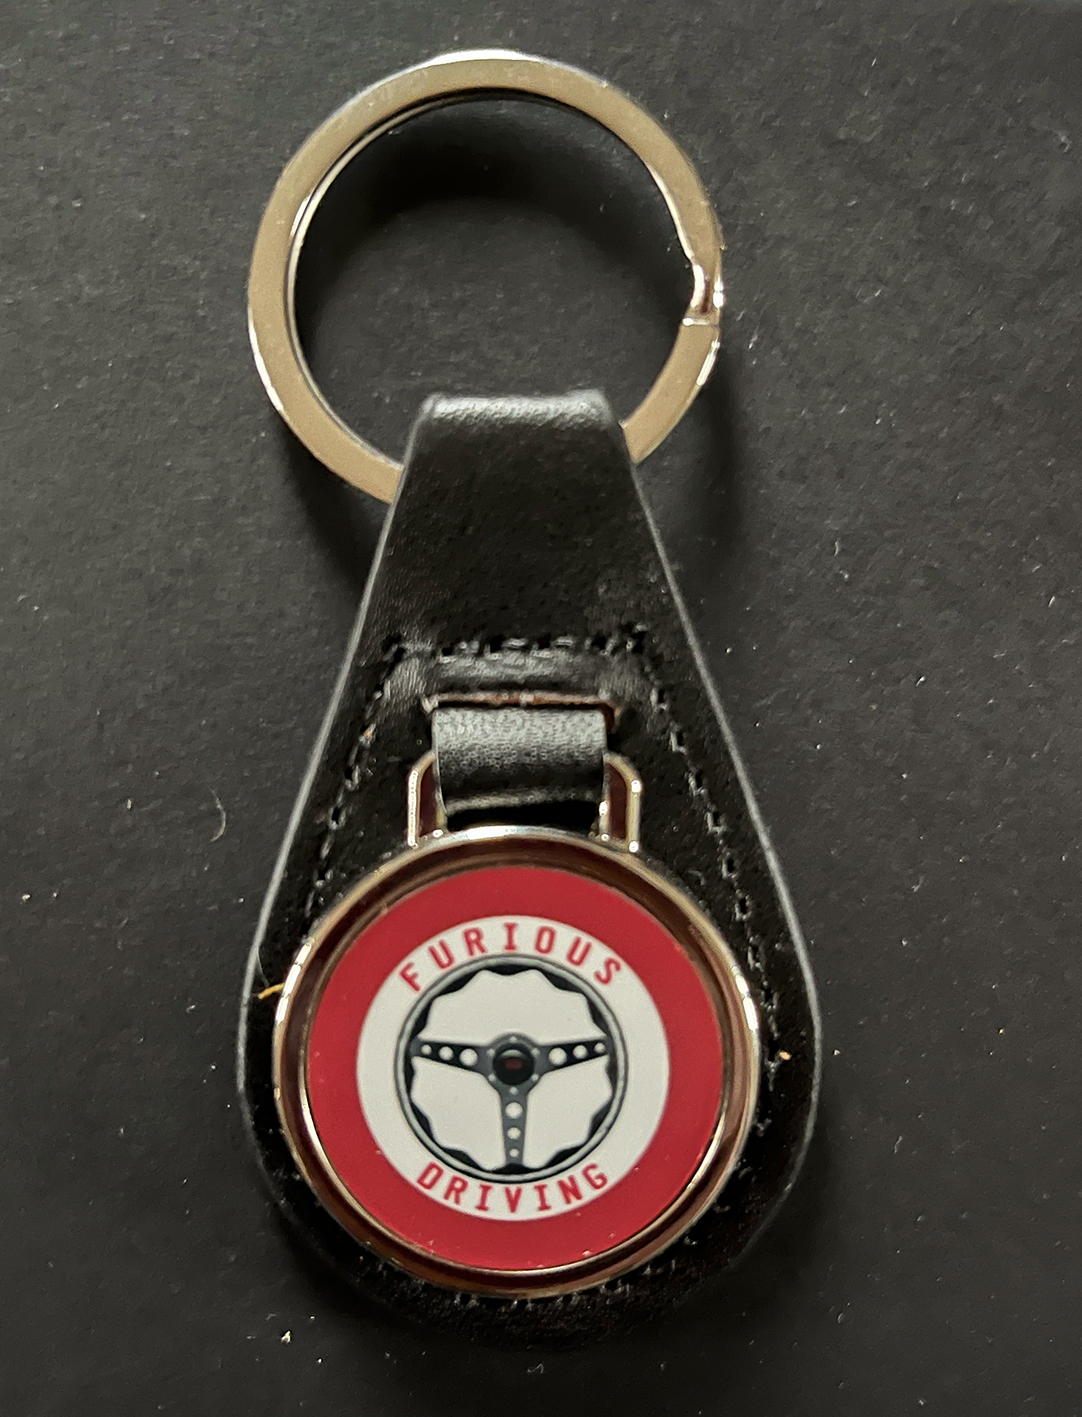 Furious Driving leather keyring - Furious Driving